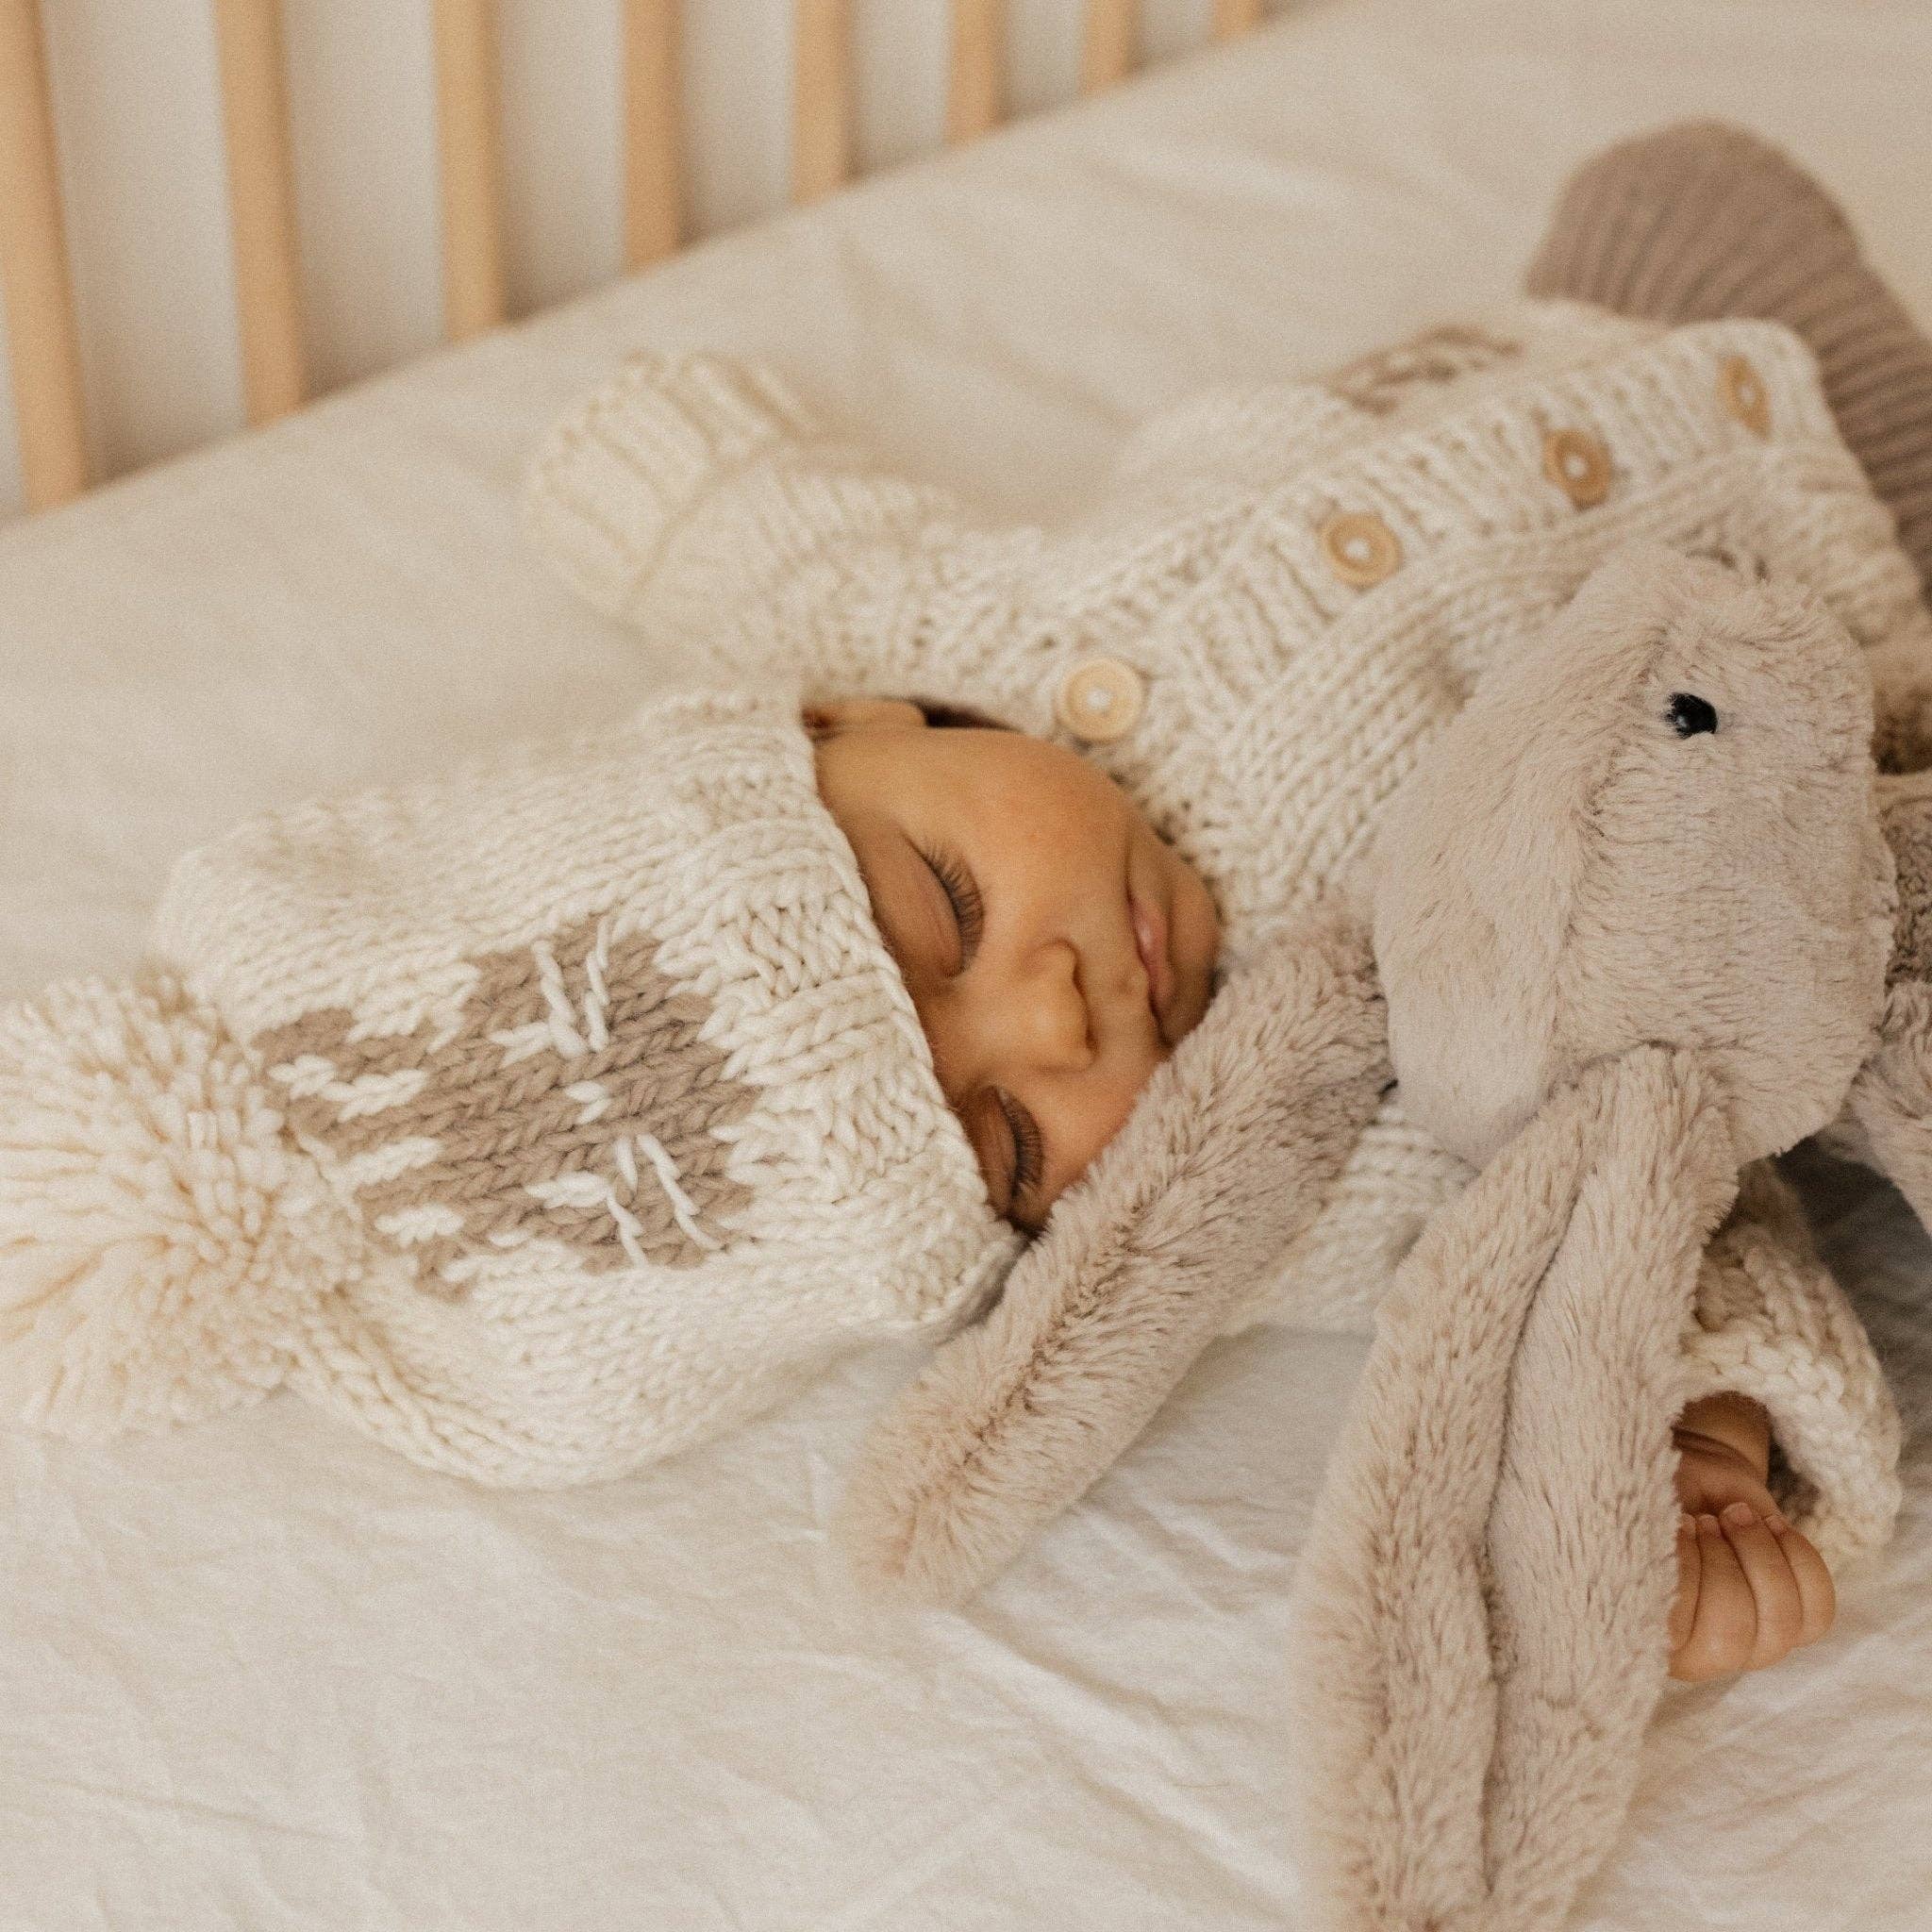 Huggalugs - Whiskers Bunny Rabbit Hand Knit Beanie Hat due Late Jan: M (6-24 months)